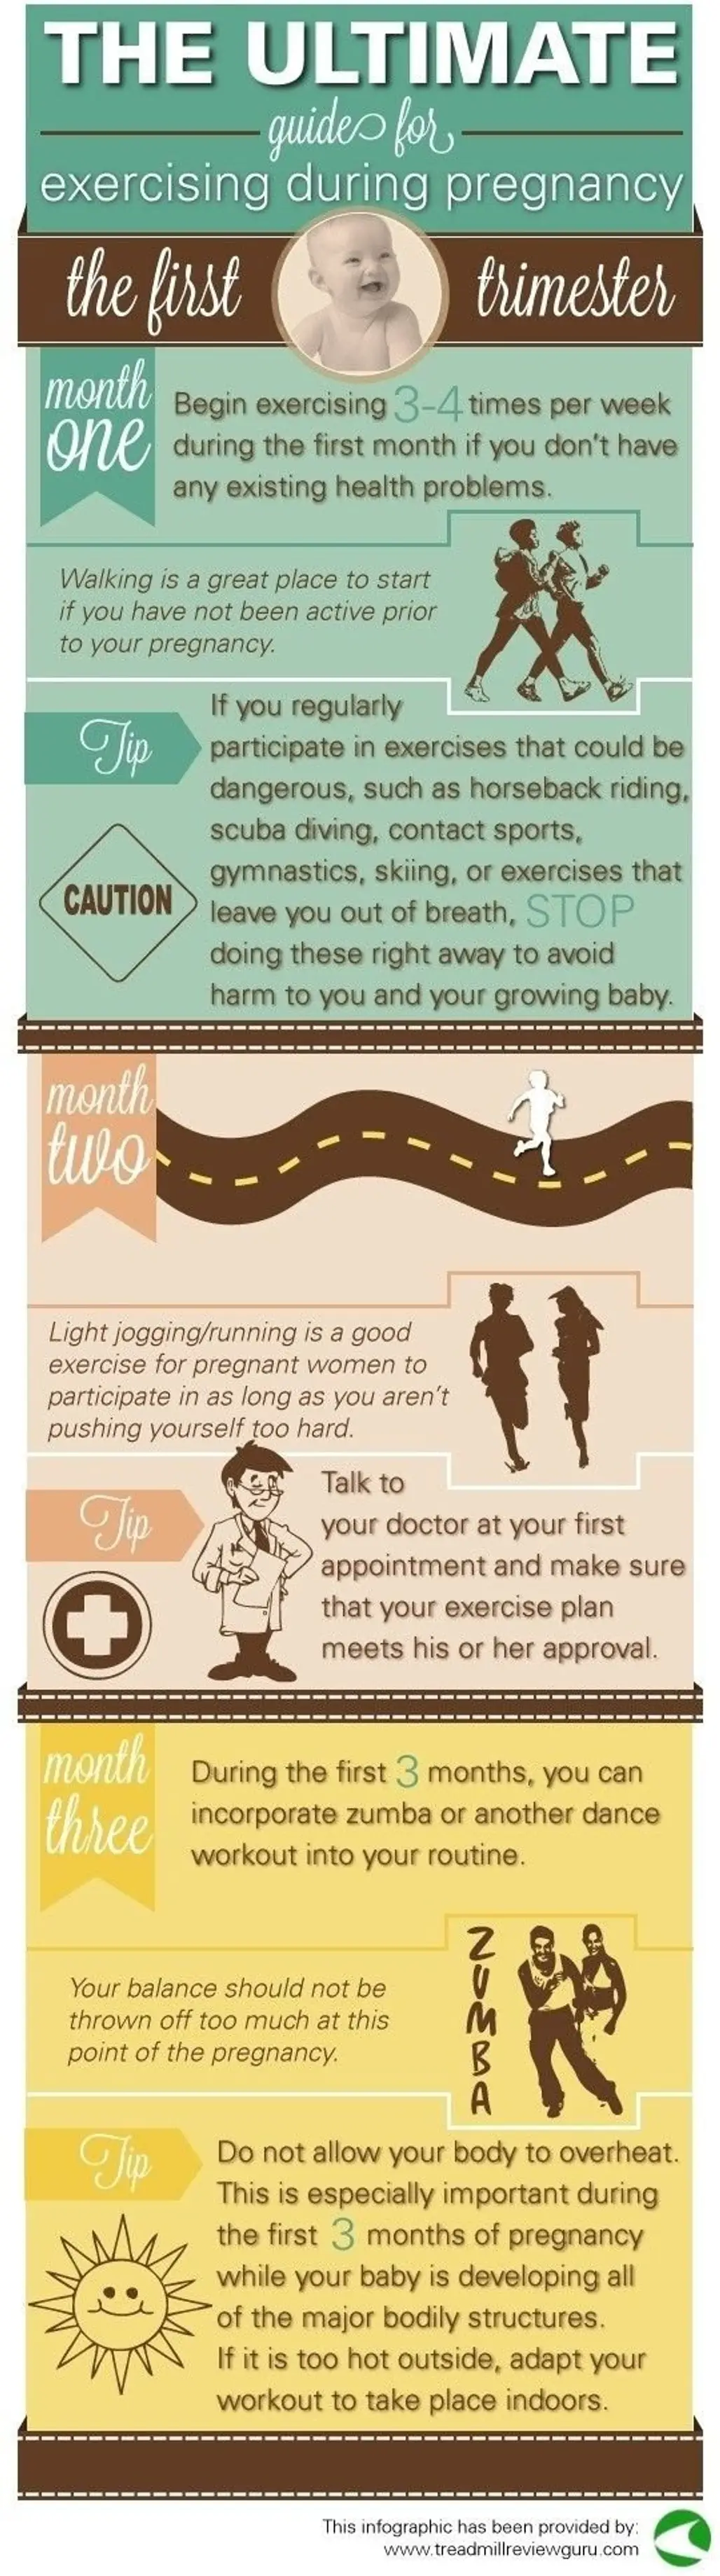 Guide for Exercise during Pregnancy